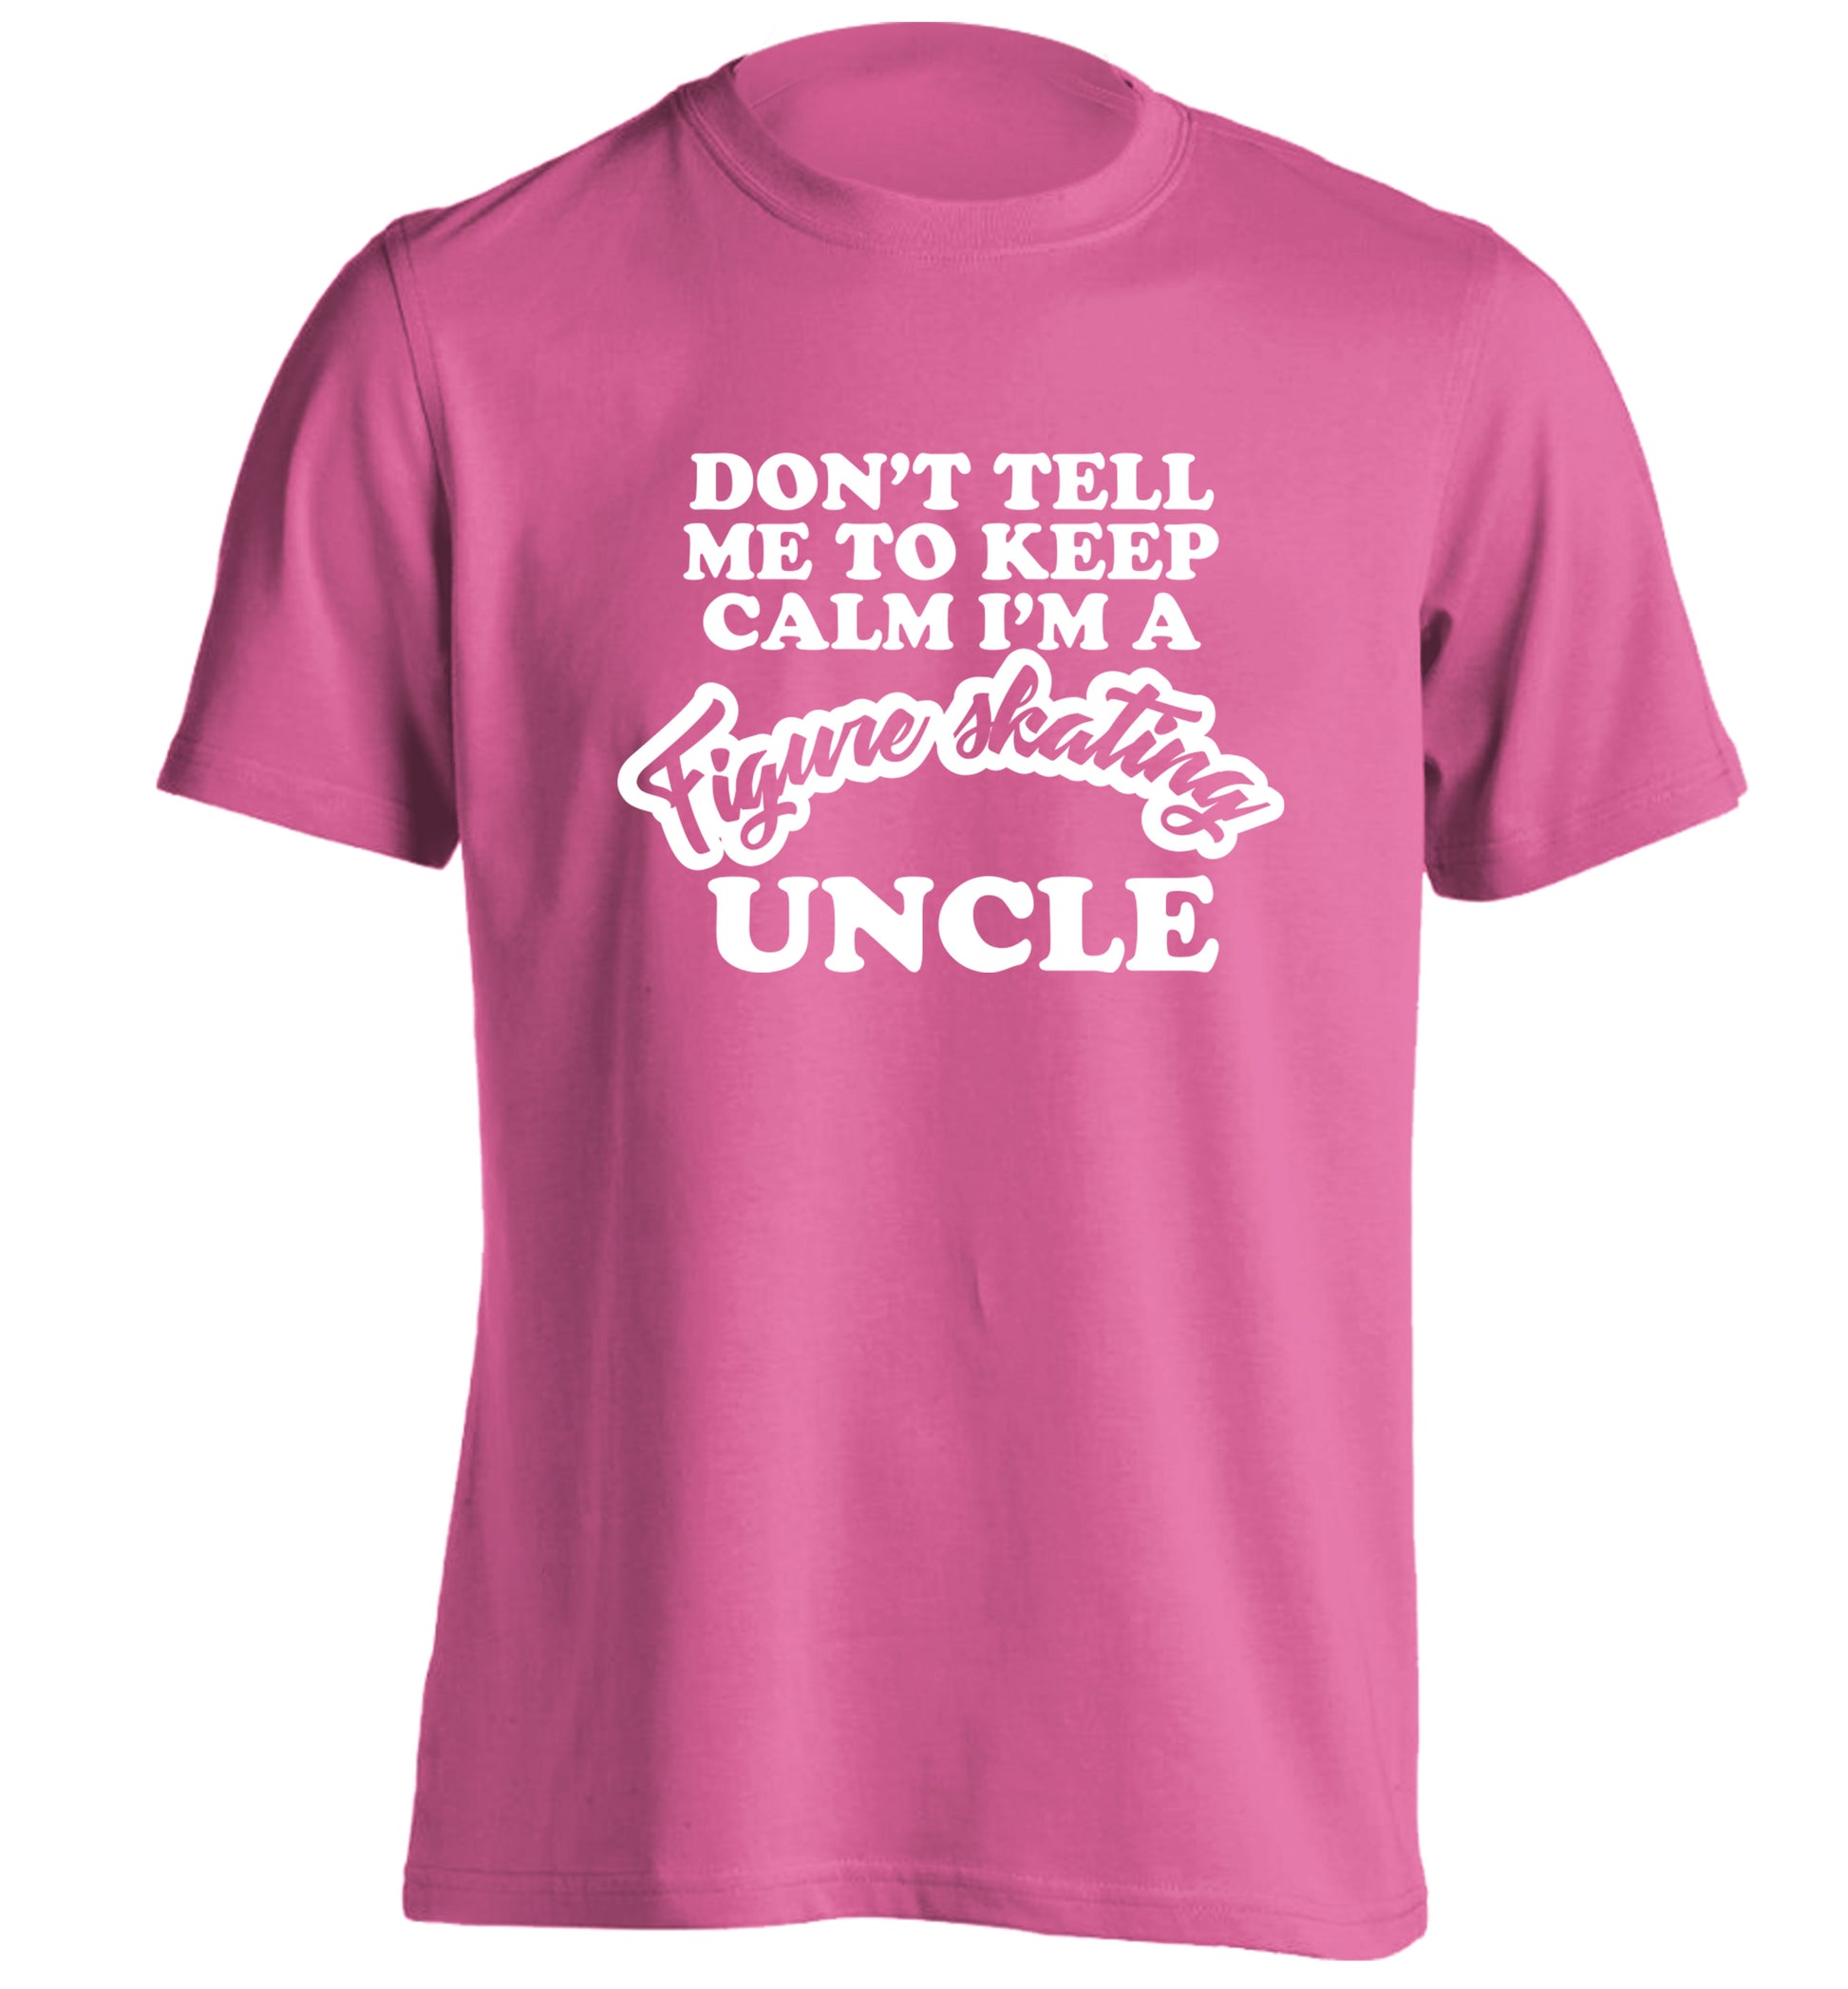 Don't tell me to keep calm I'm a figure skating uncle adults unisexpink Tshirt 2XL